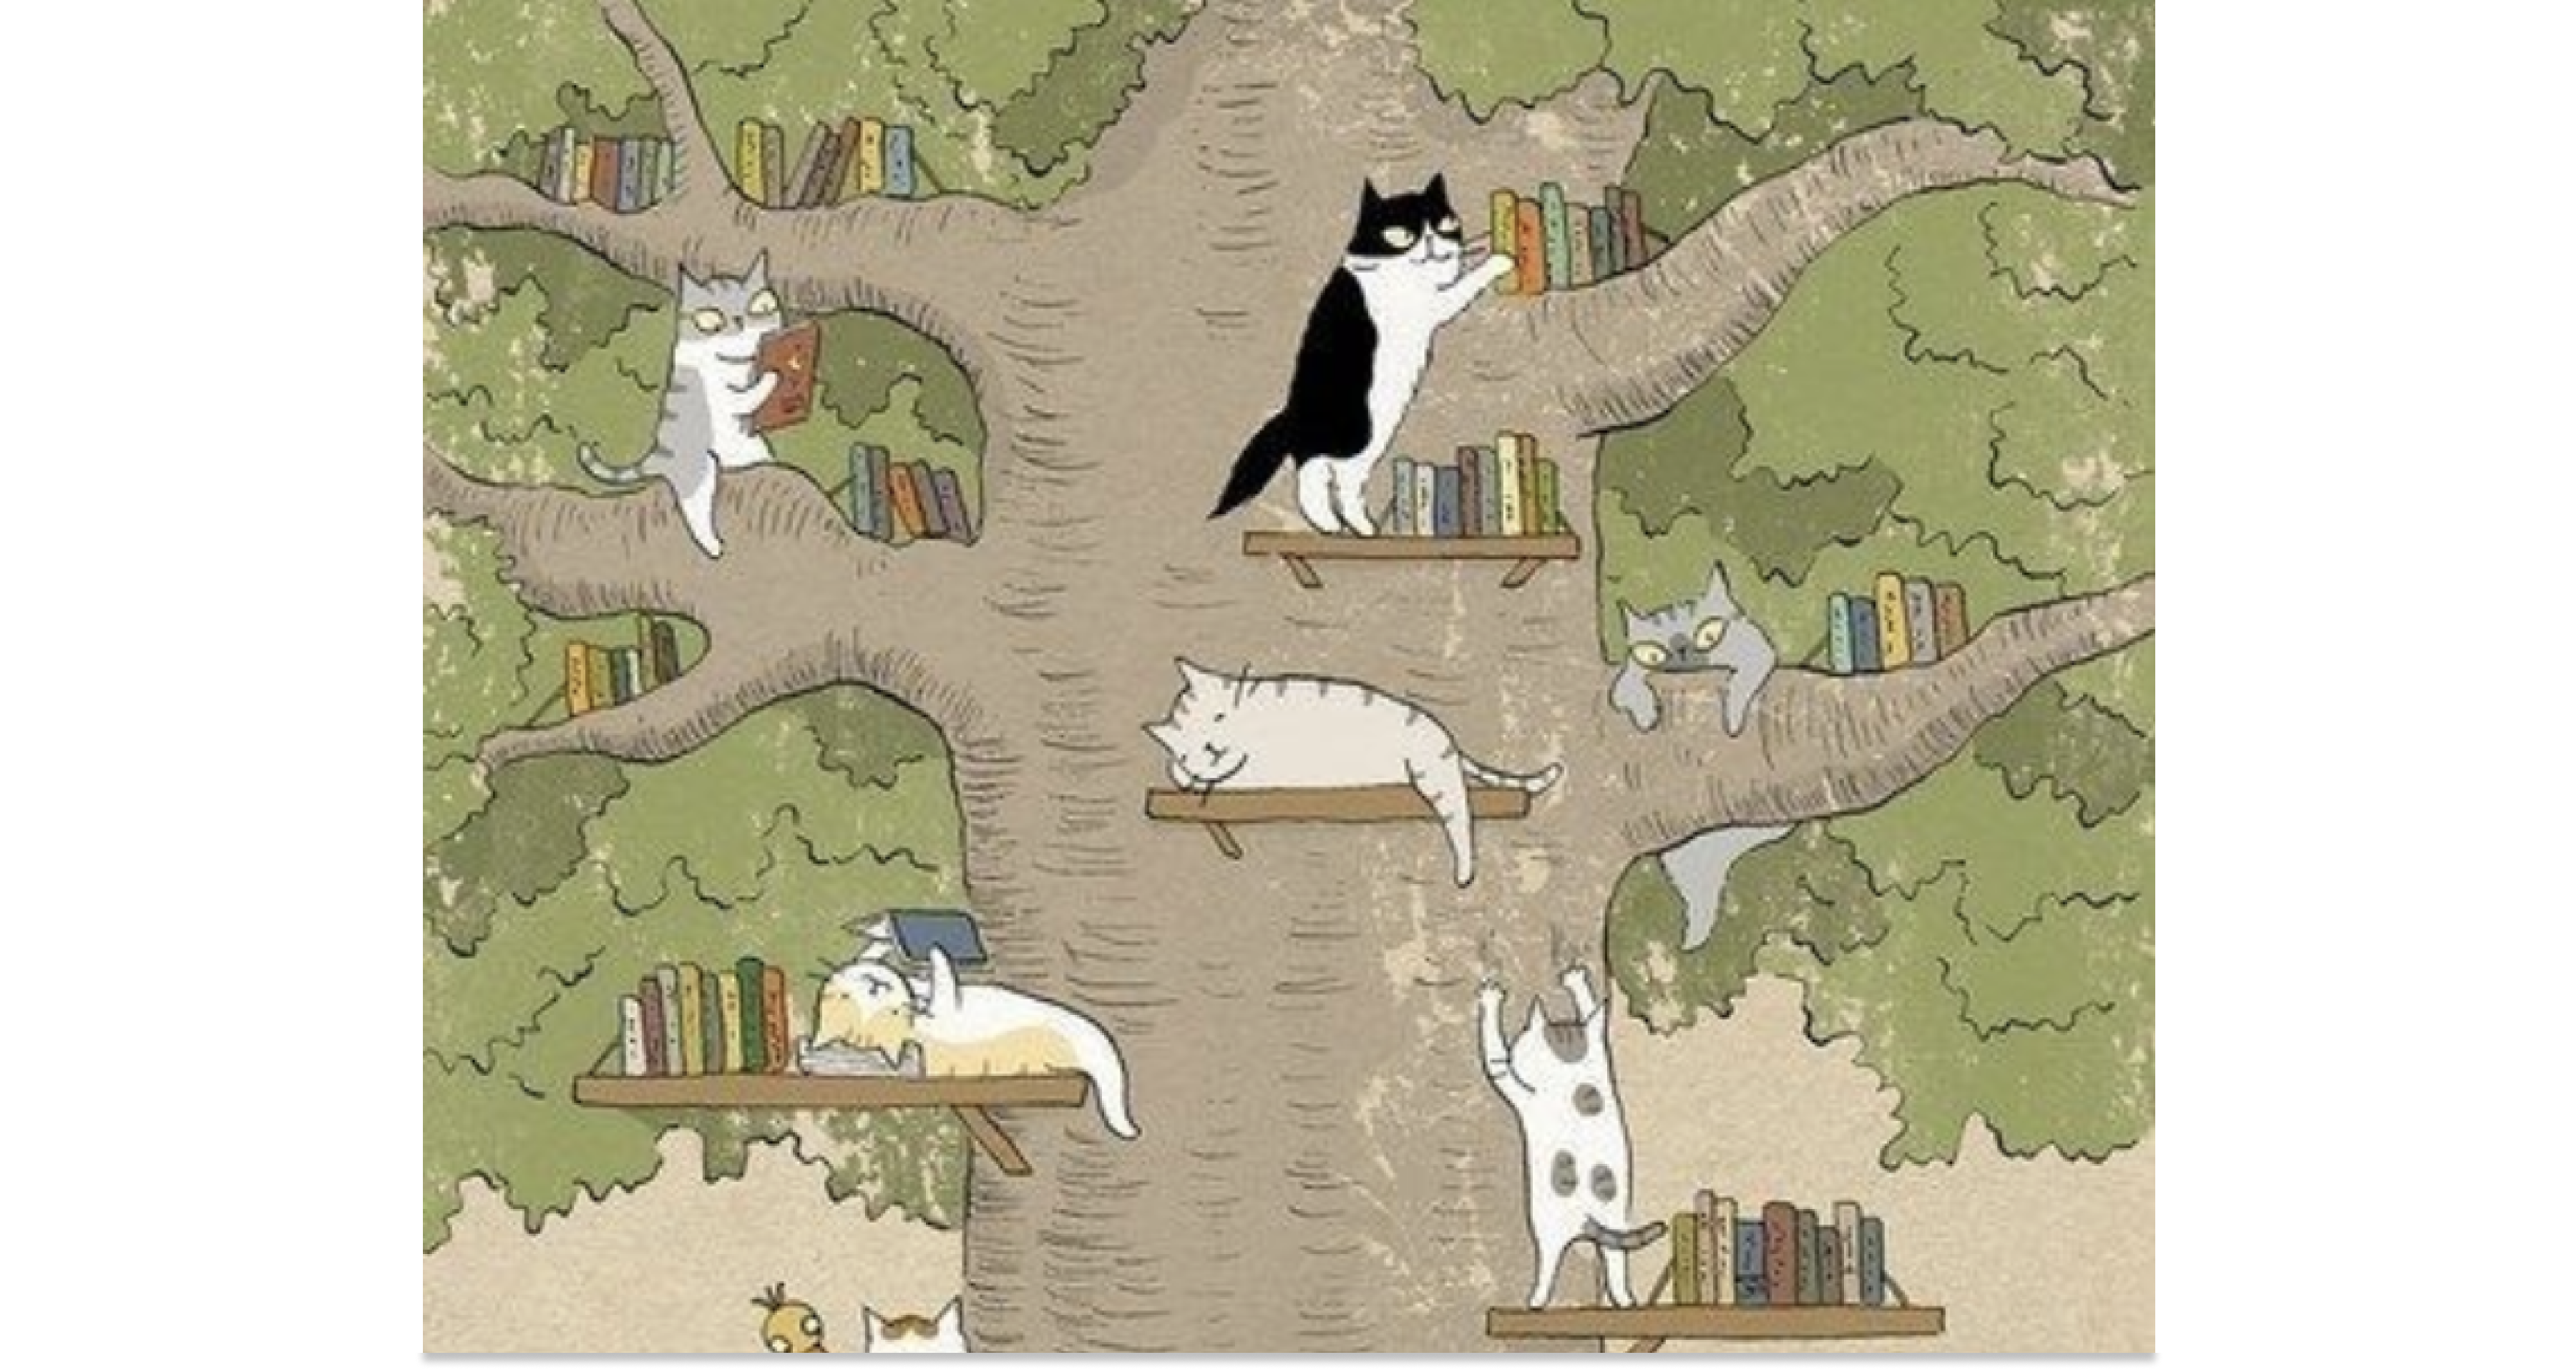 Cats in a tree climbing and reading books